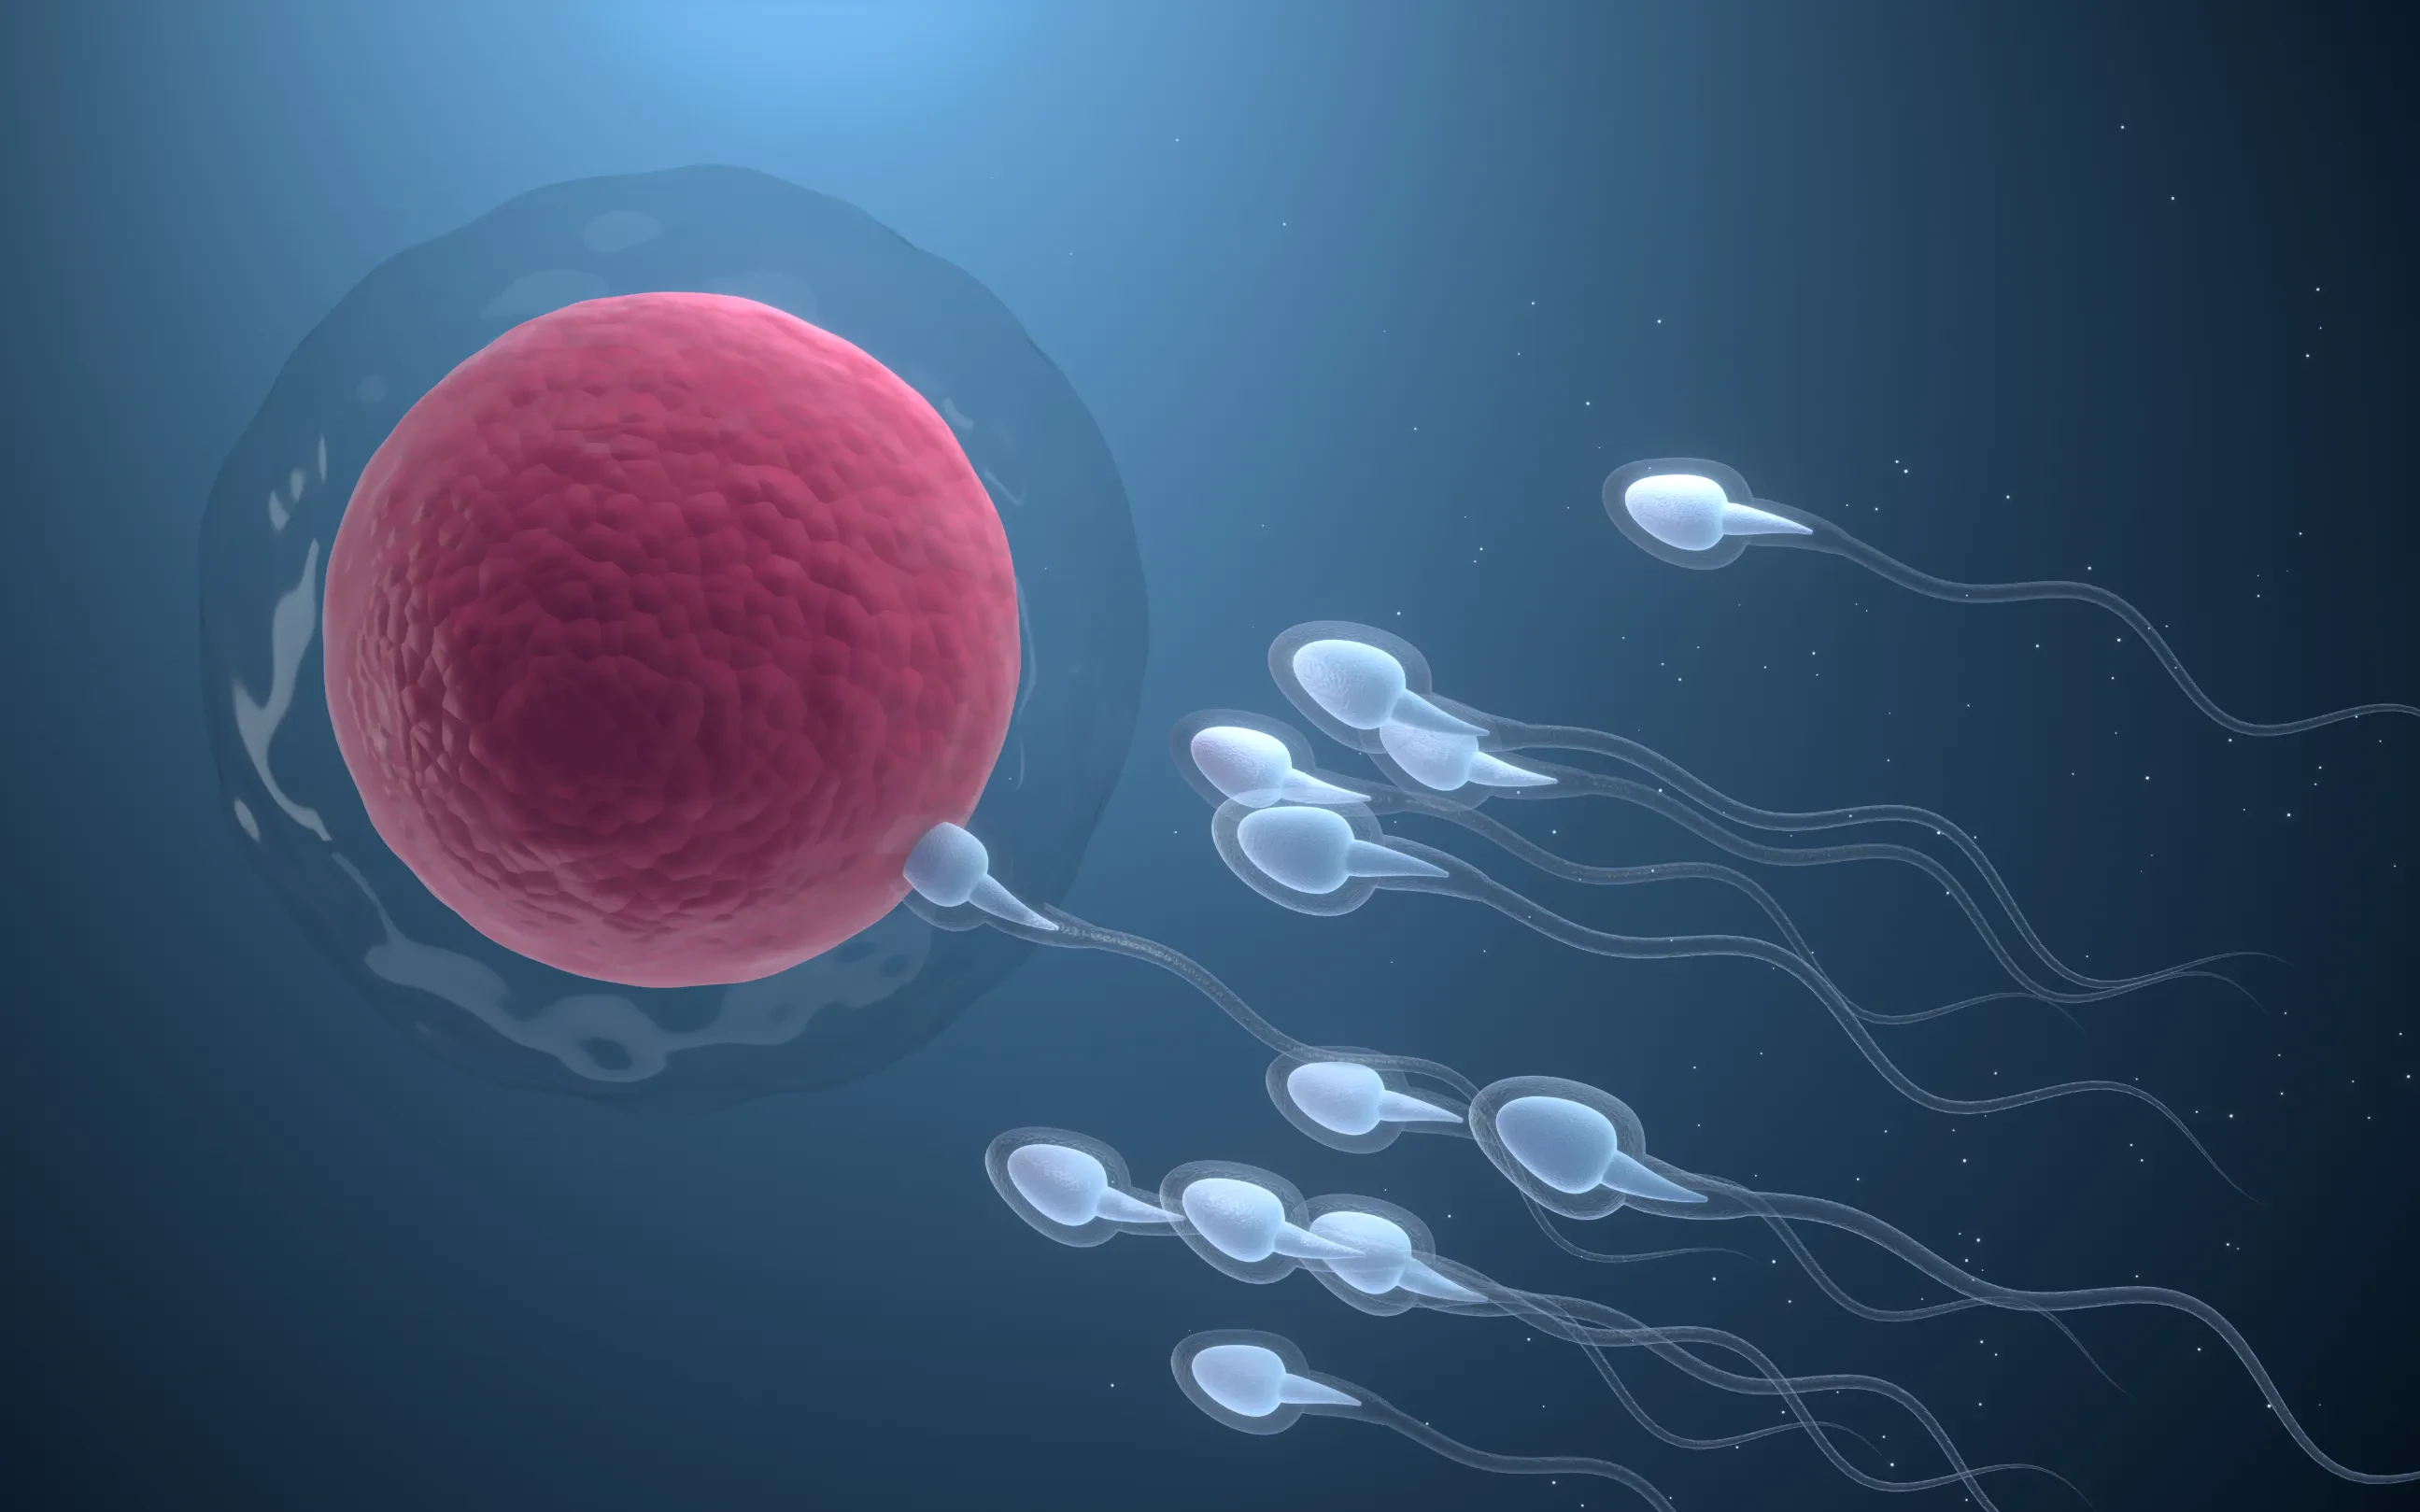 picture of an egg and sperm